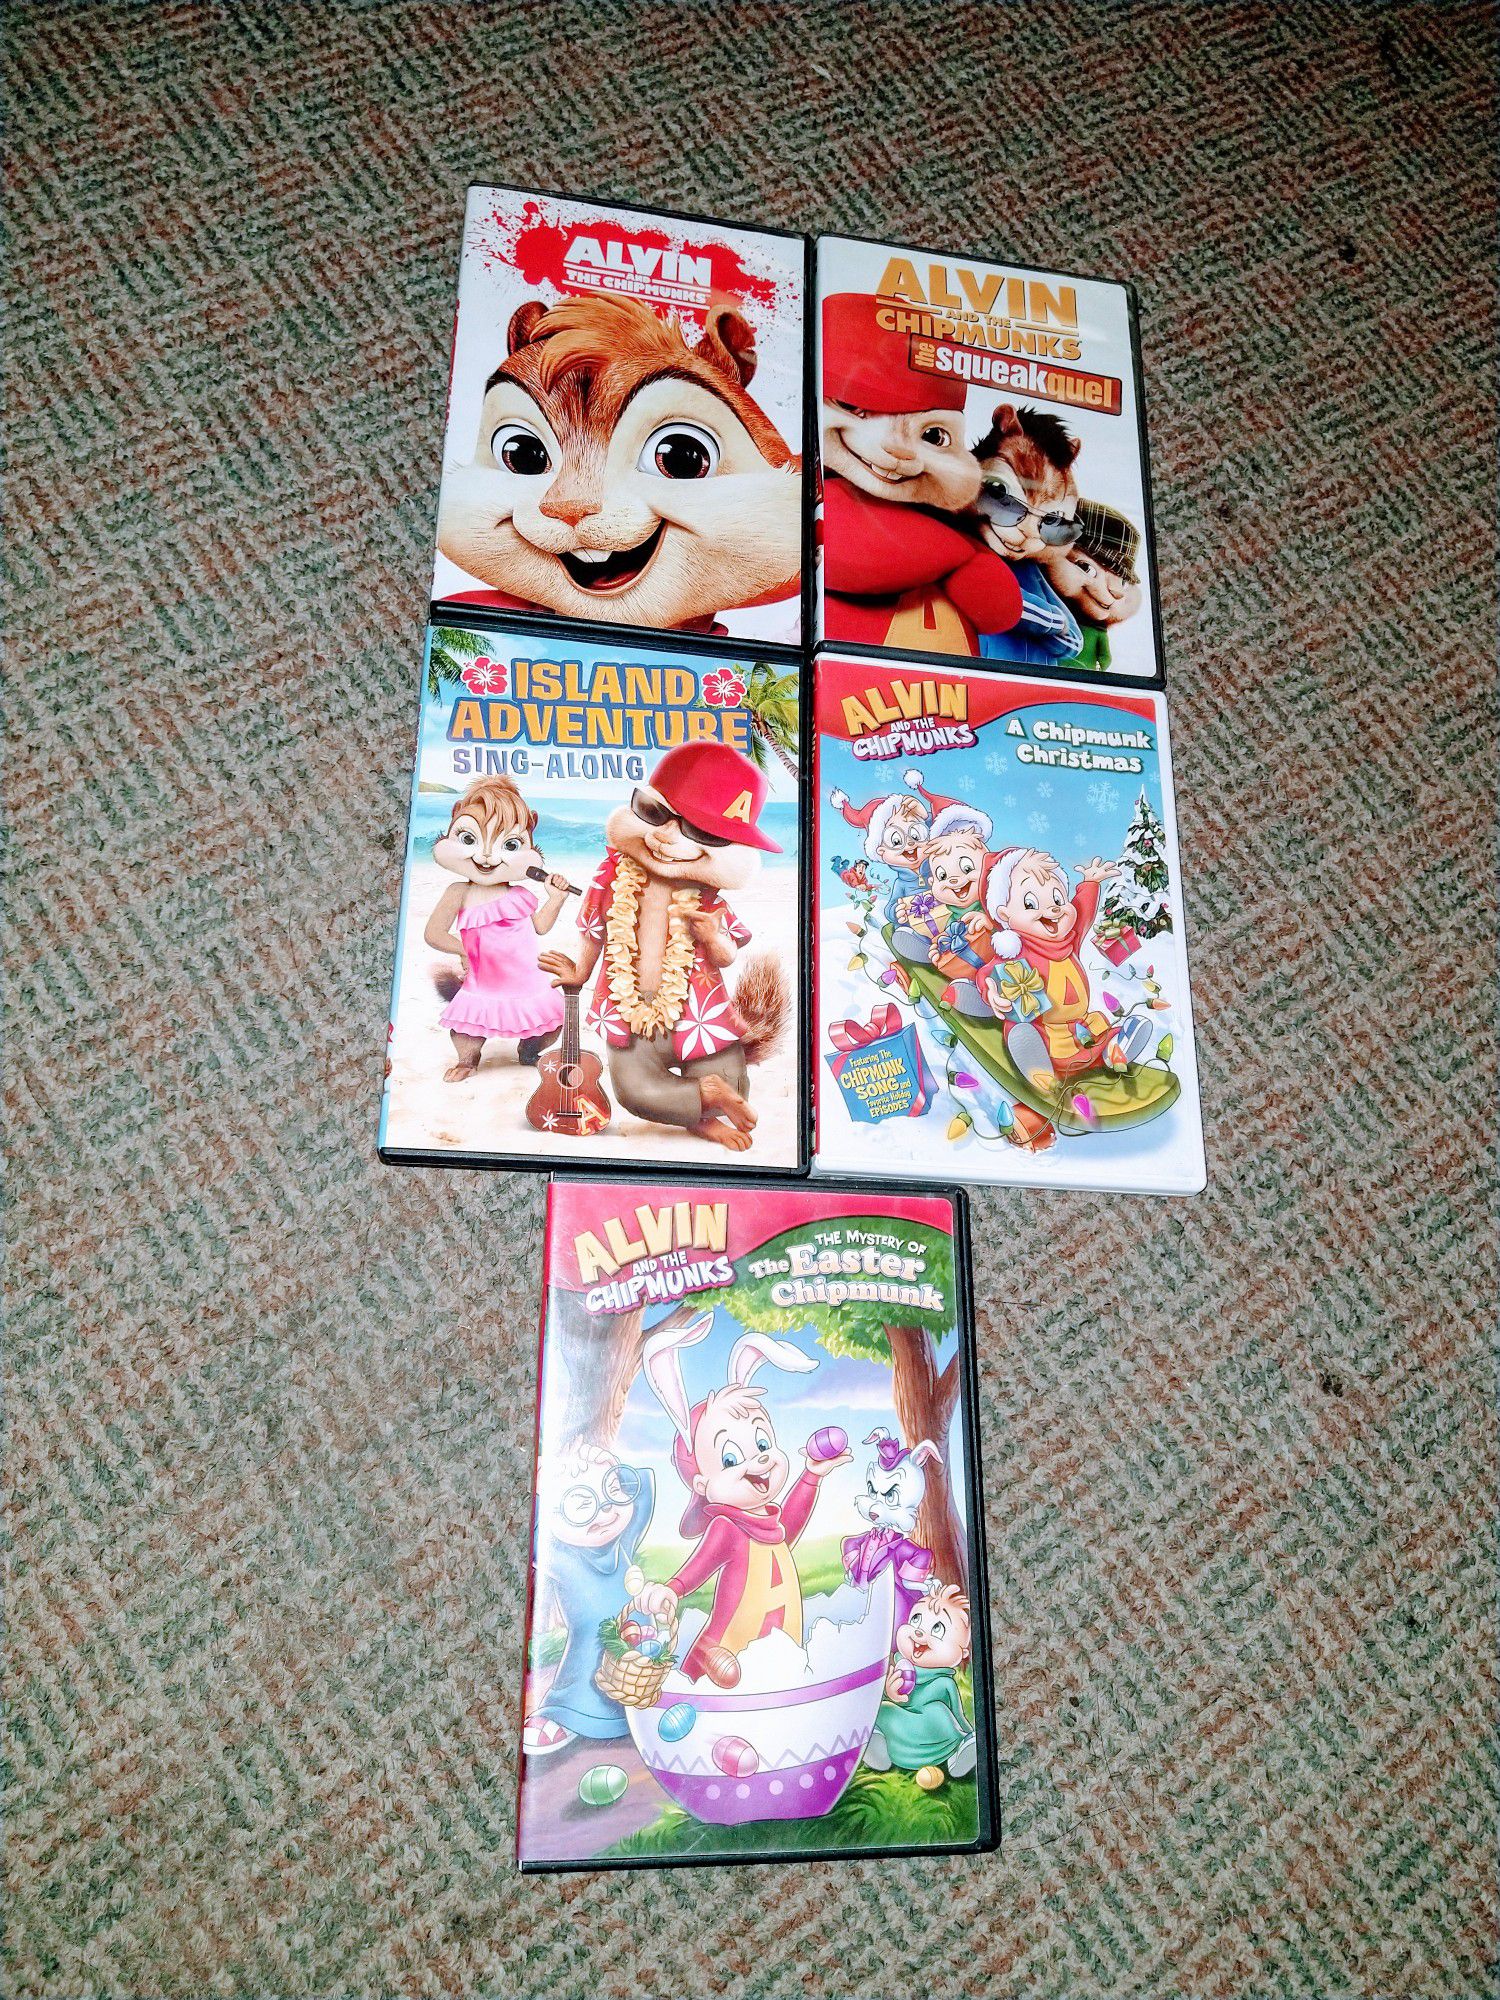 Alvin and the chipmunks dvd lot